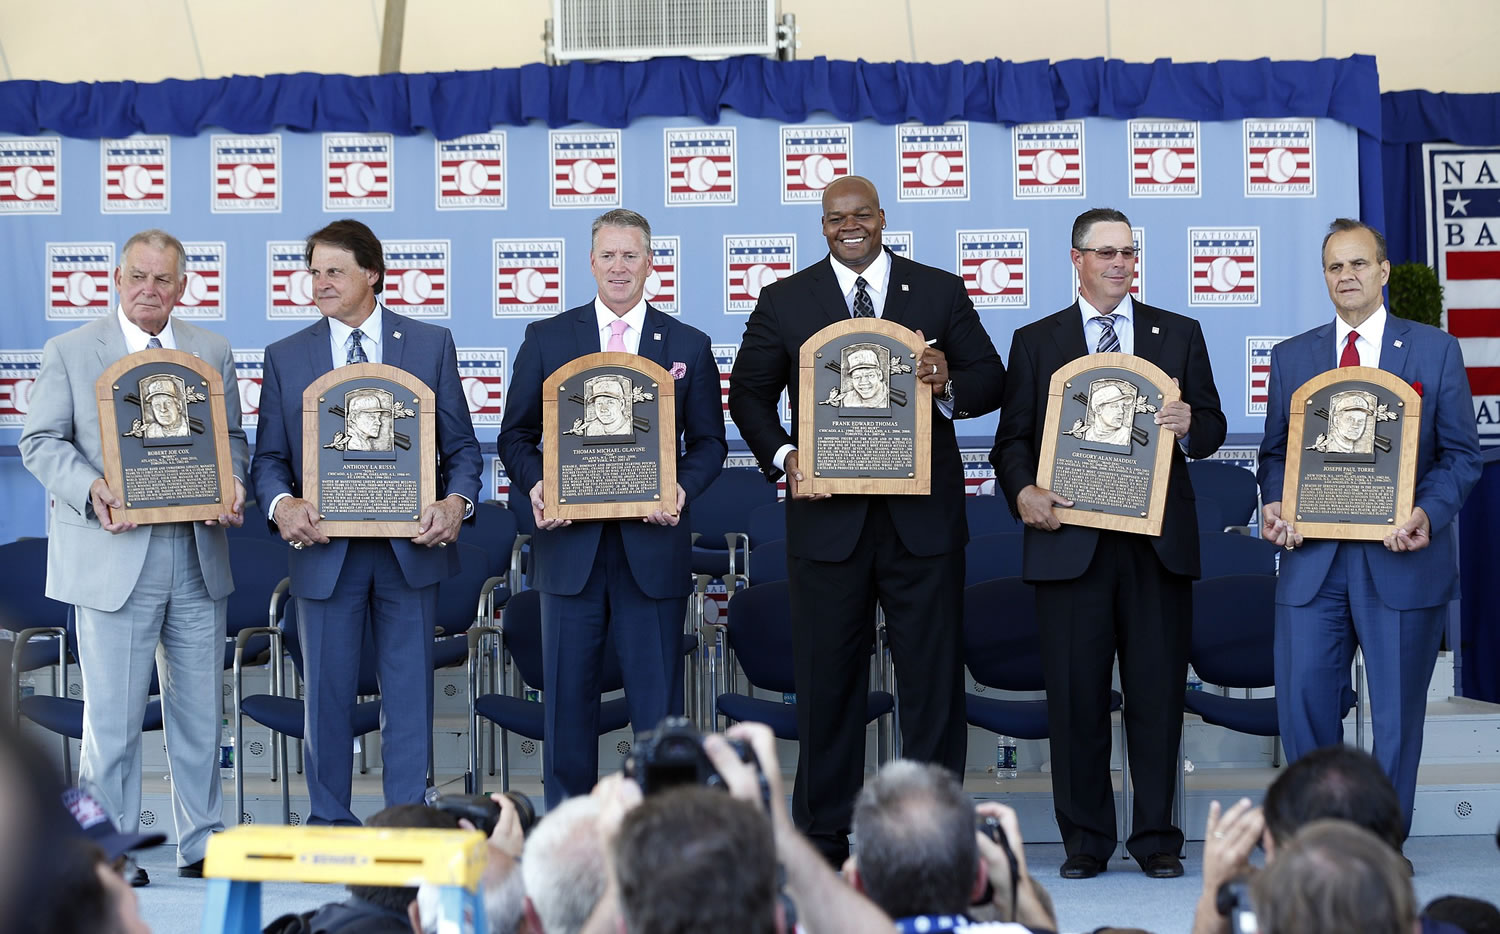 National Baseball Hall of Fame inductees, from left, Bobby Cox, Tony La Russa, Tom Glavine, Frank Thomas, Greg Maddux and Joe Torre hold their plaques after an induction ceremony at the Clark Sports Center on Sunday, July 27, 2014, in Cooperstown, N.Y.